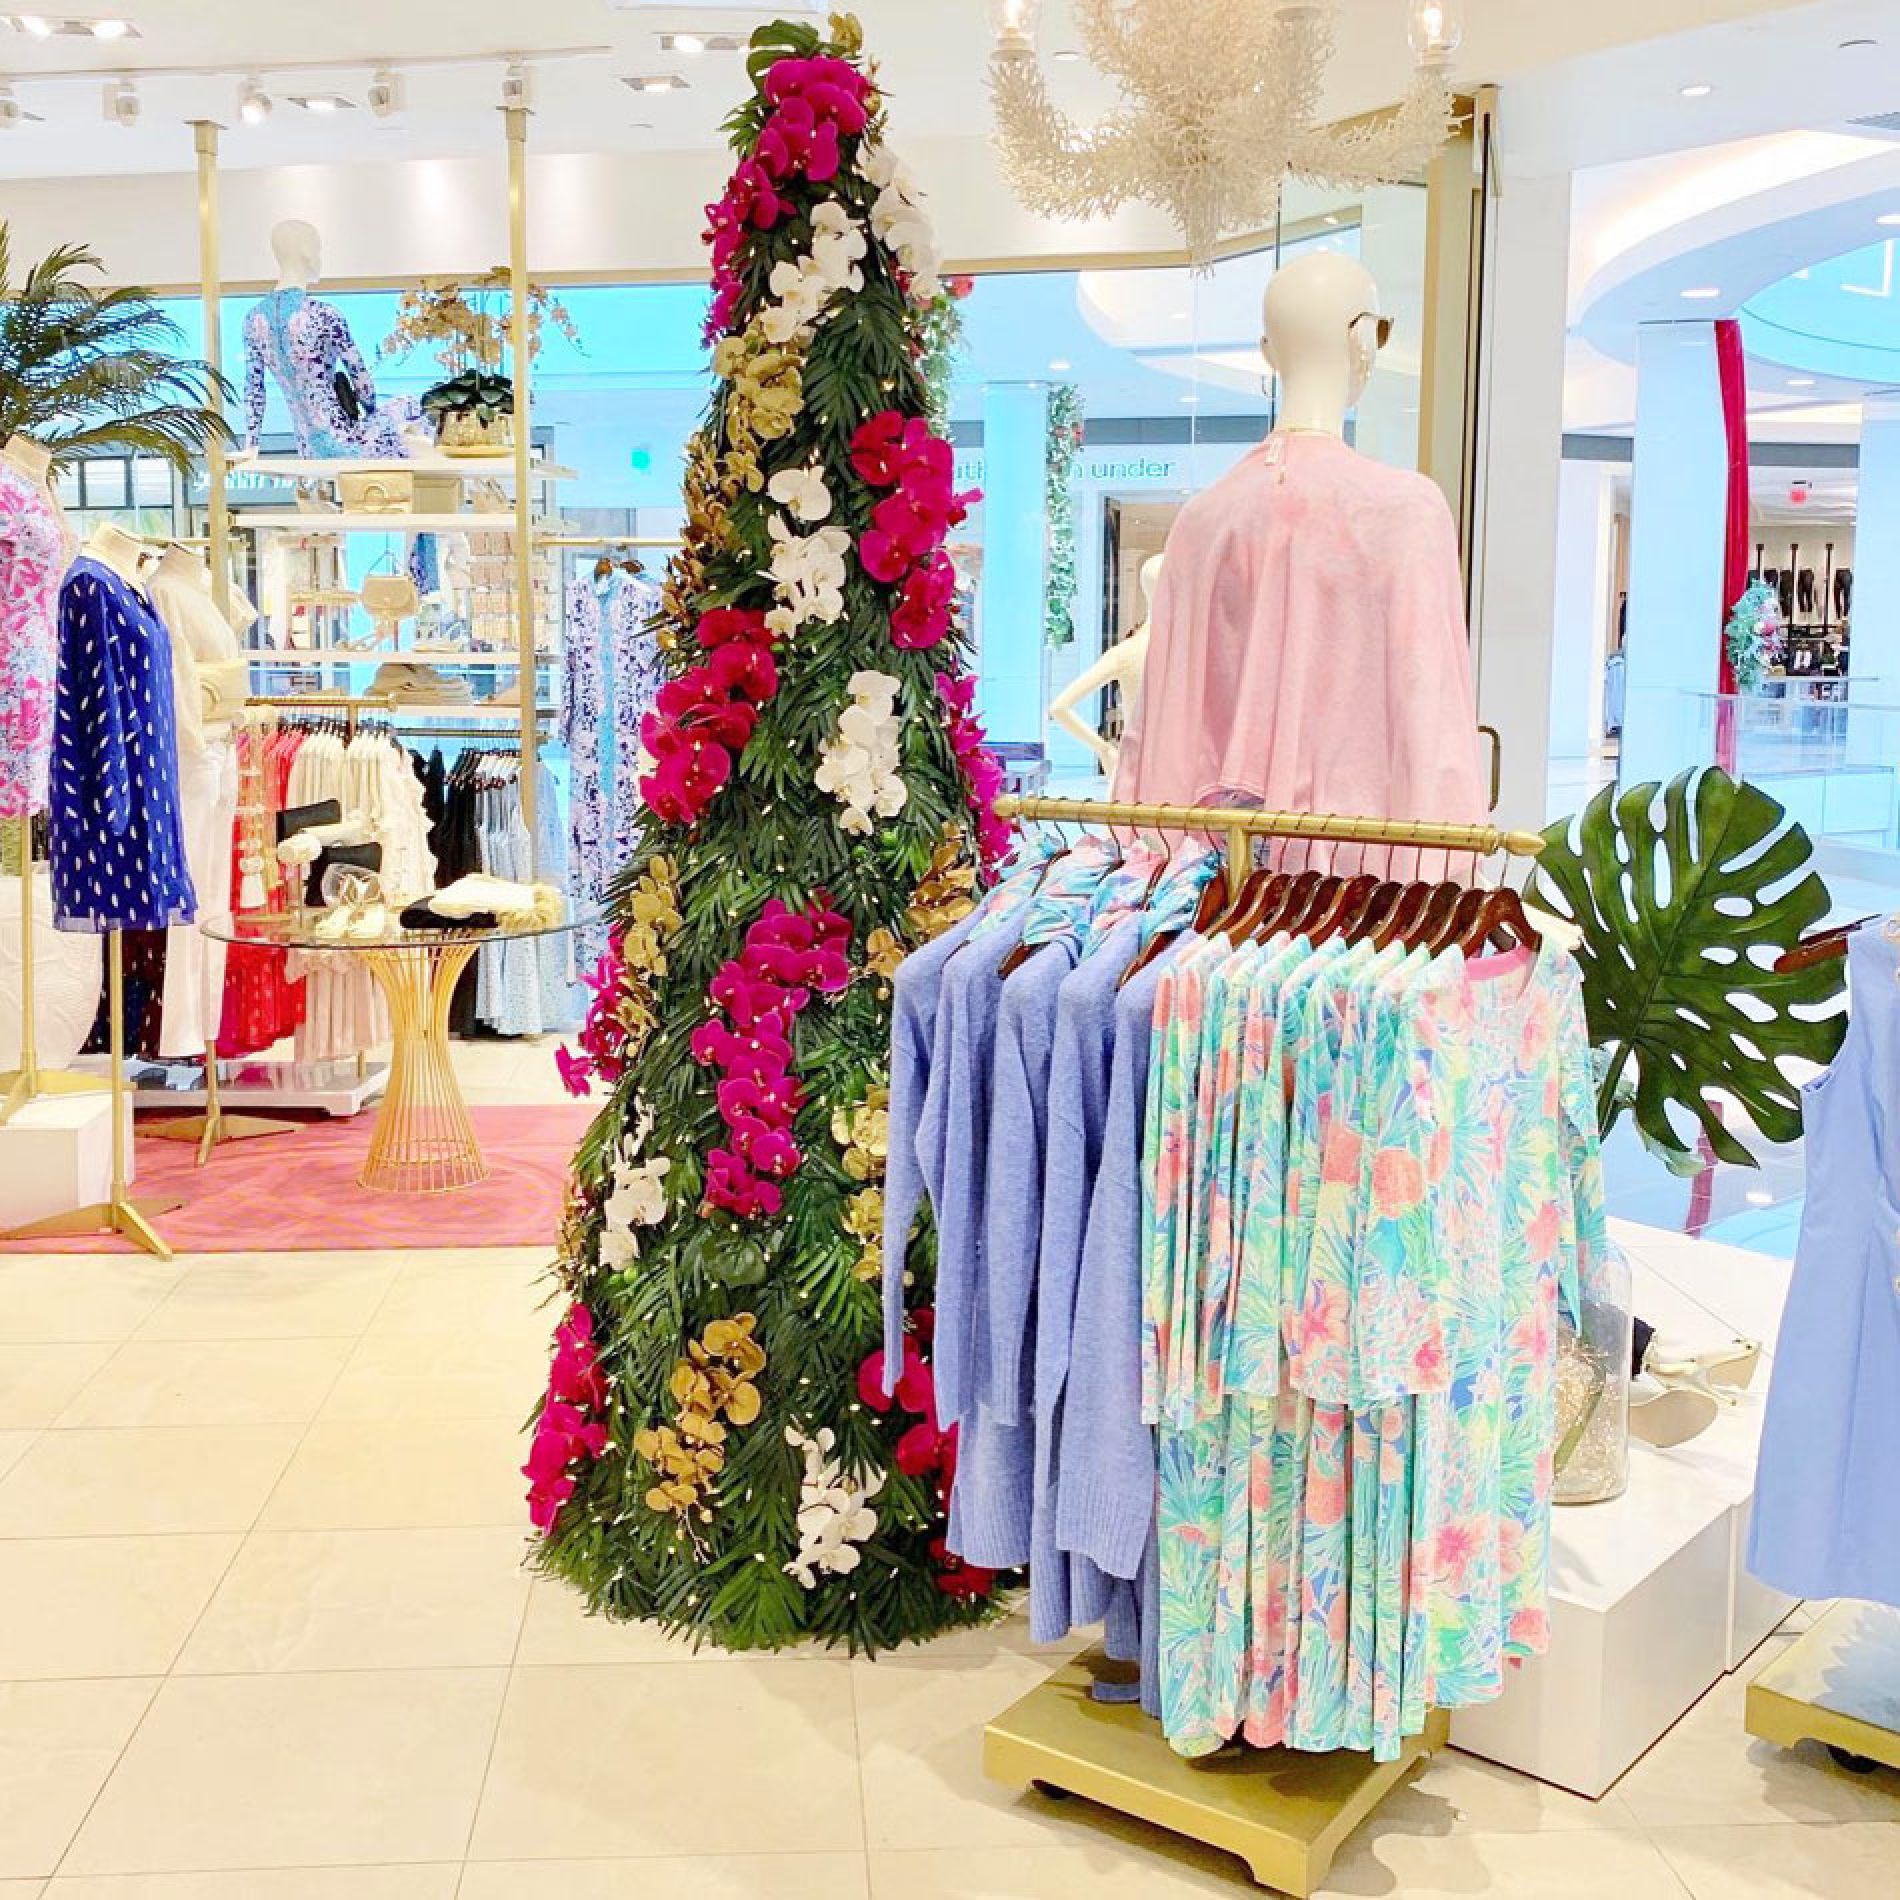 Lilly Pulitzer 2 Gallery Image